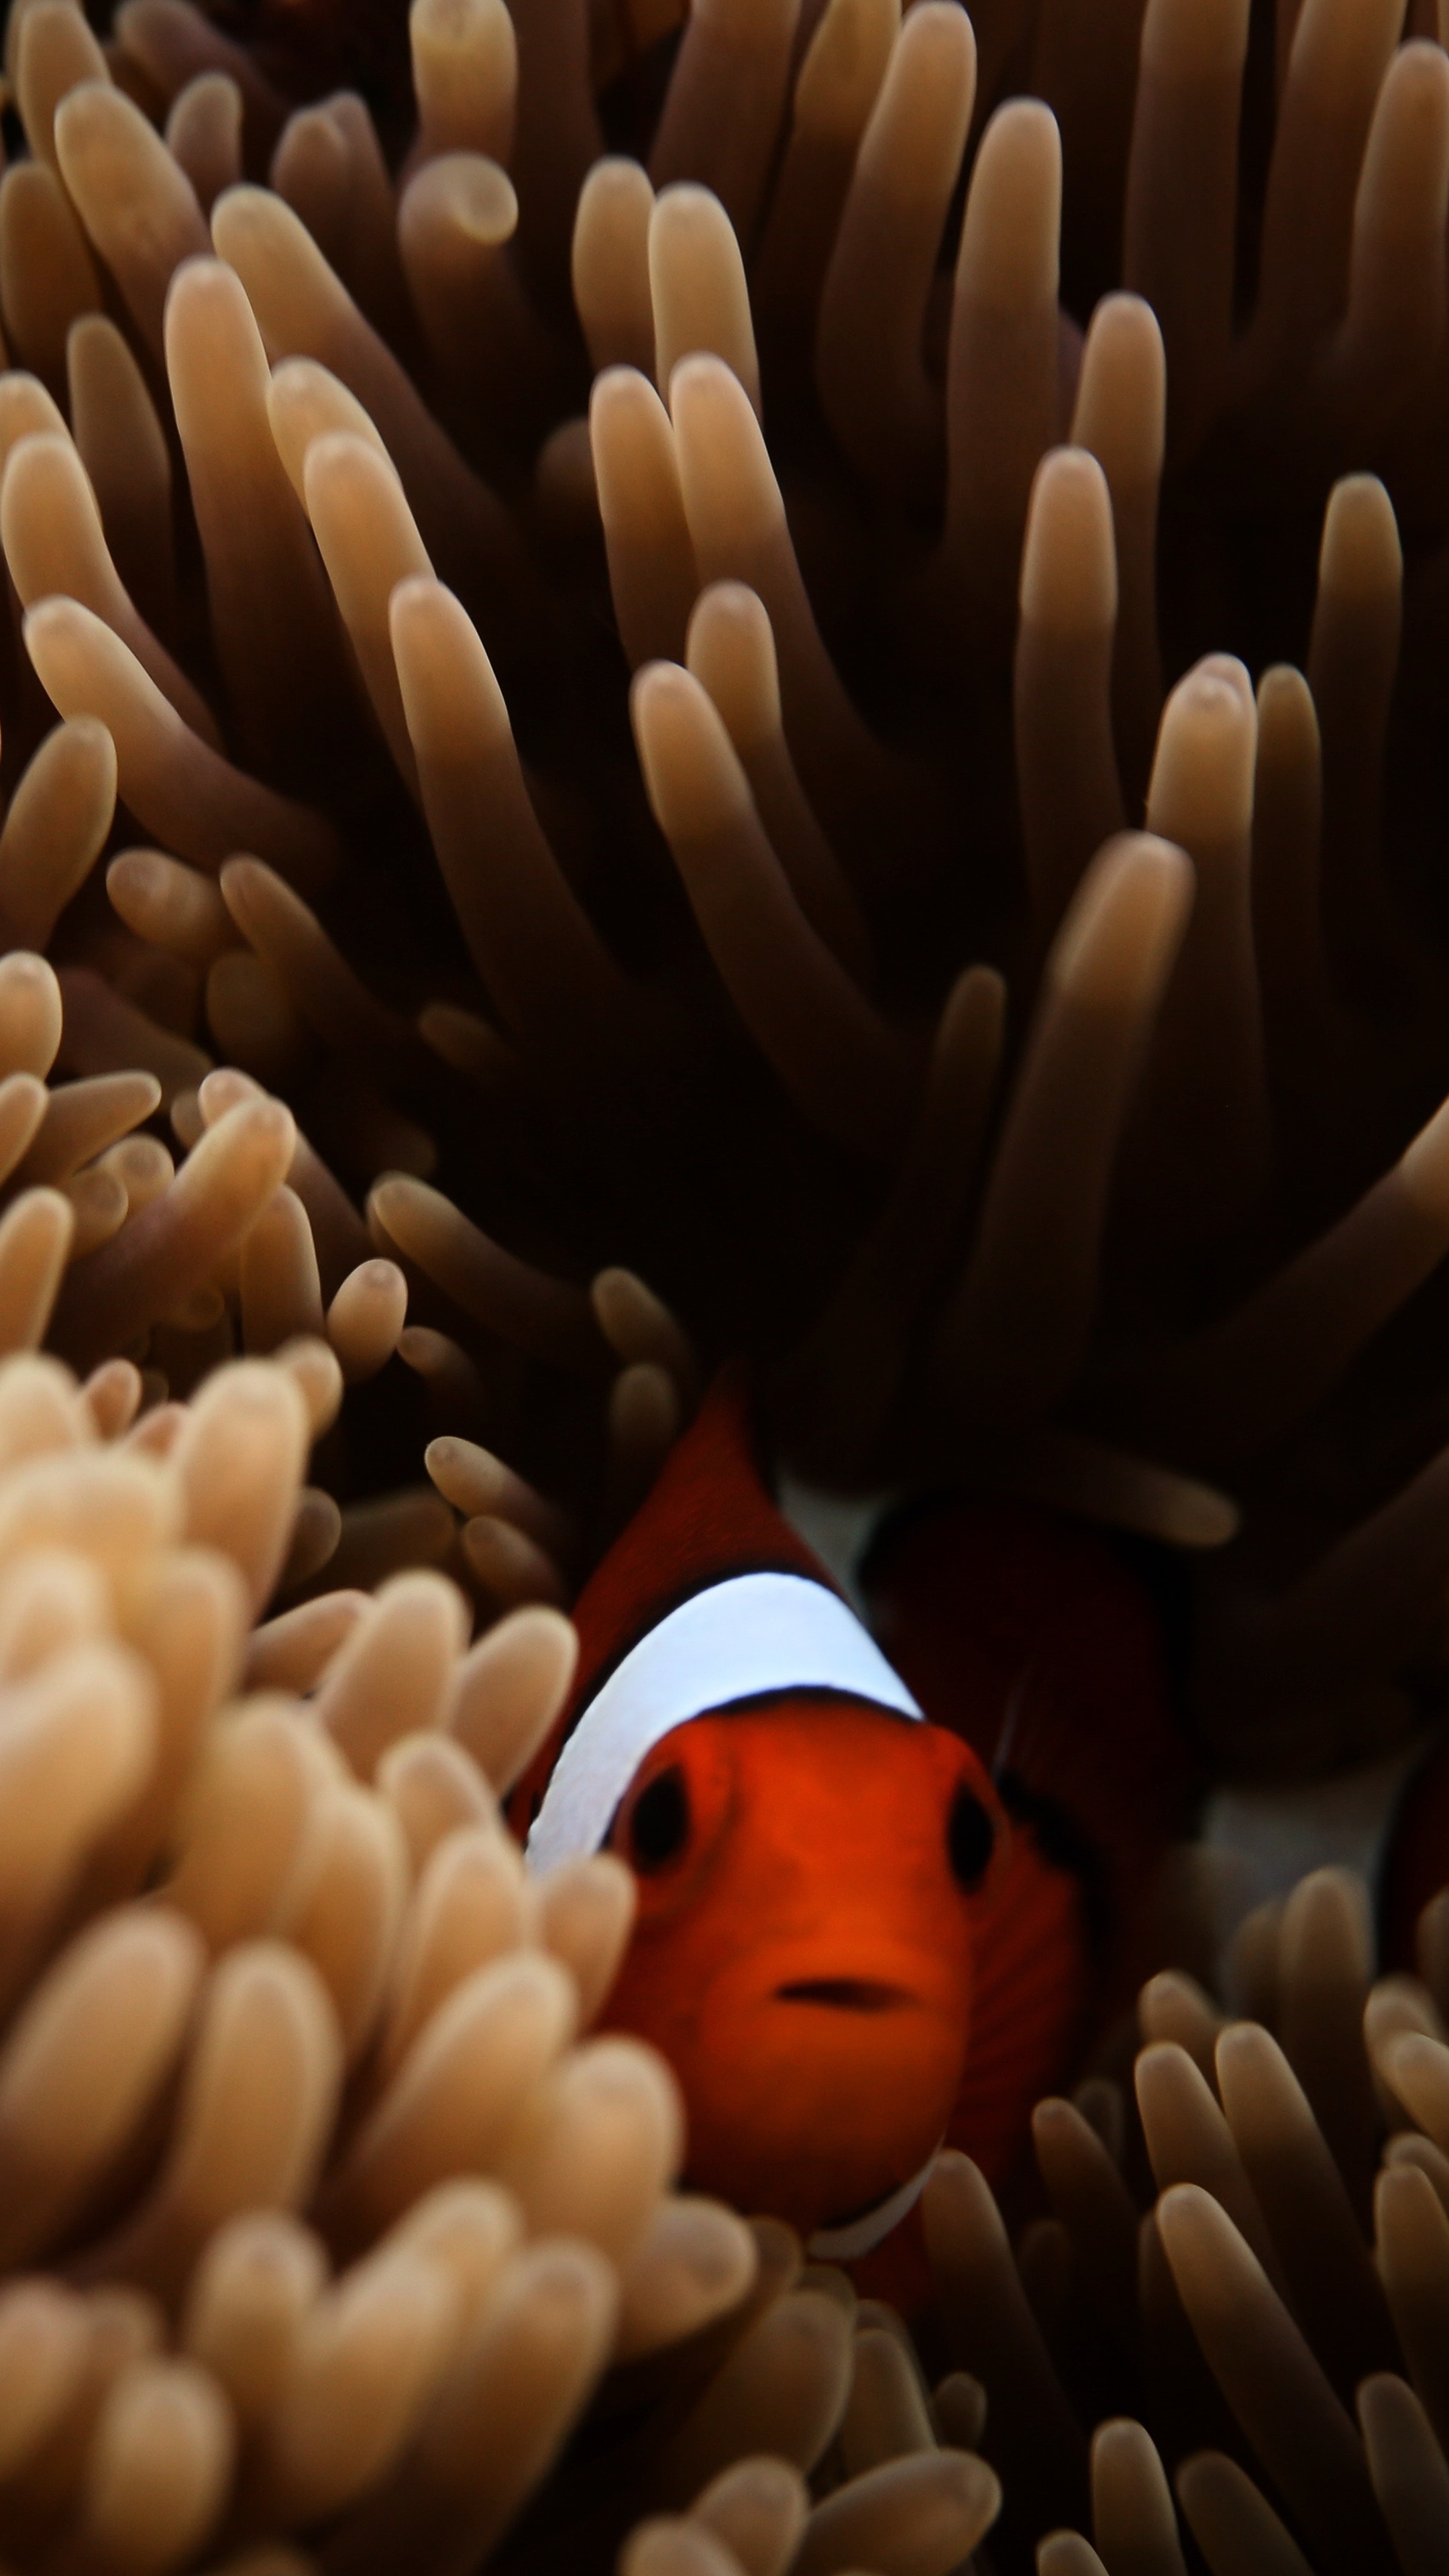 Clownfish sea adventure, Exquisite 5k images, Sony Xperia showcase, Stunning photography, 2160x3840 4K Phone